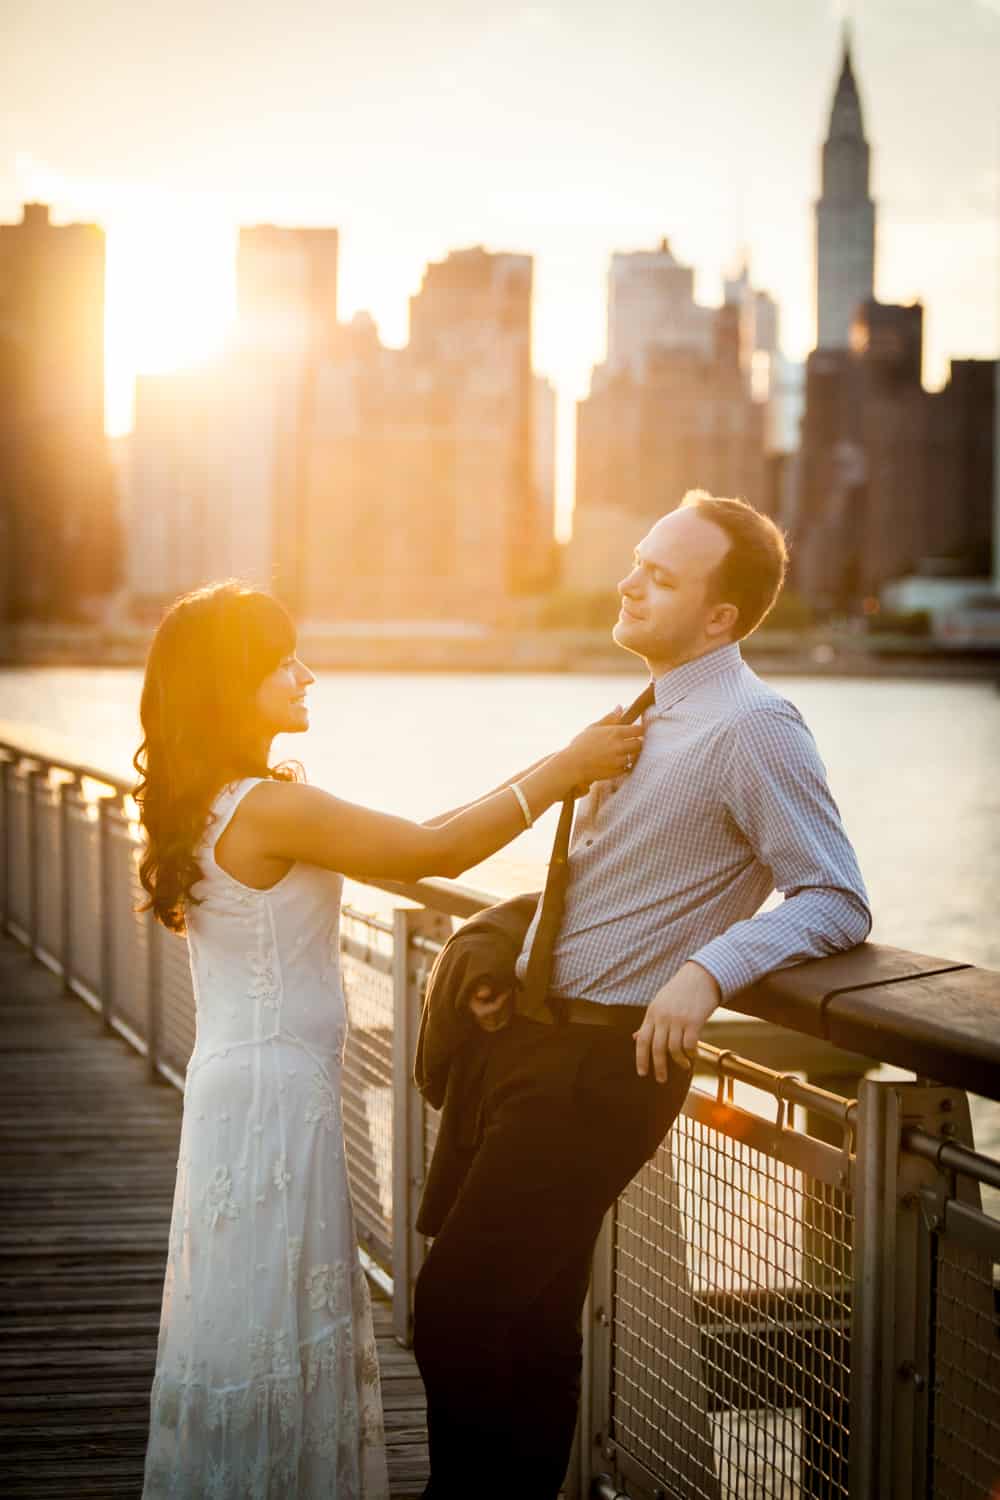 Couple leaning against railing with NYC skyline in background at sunset